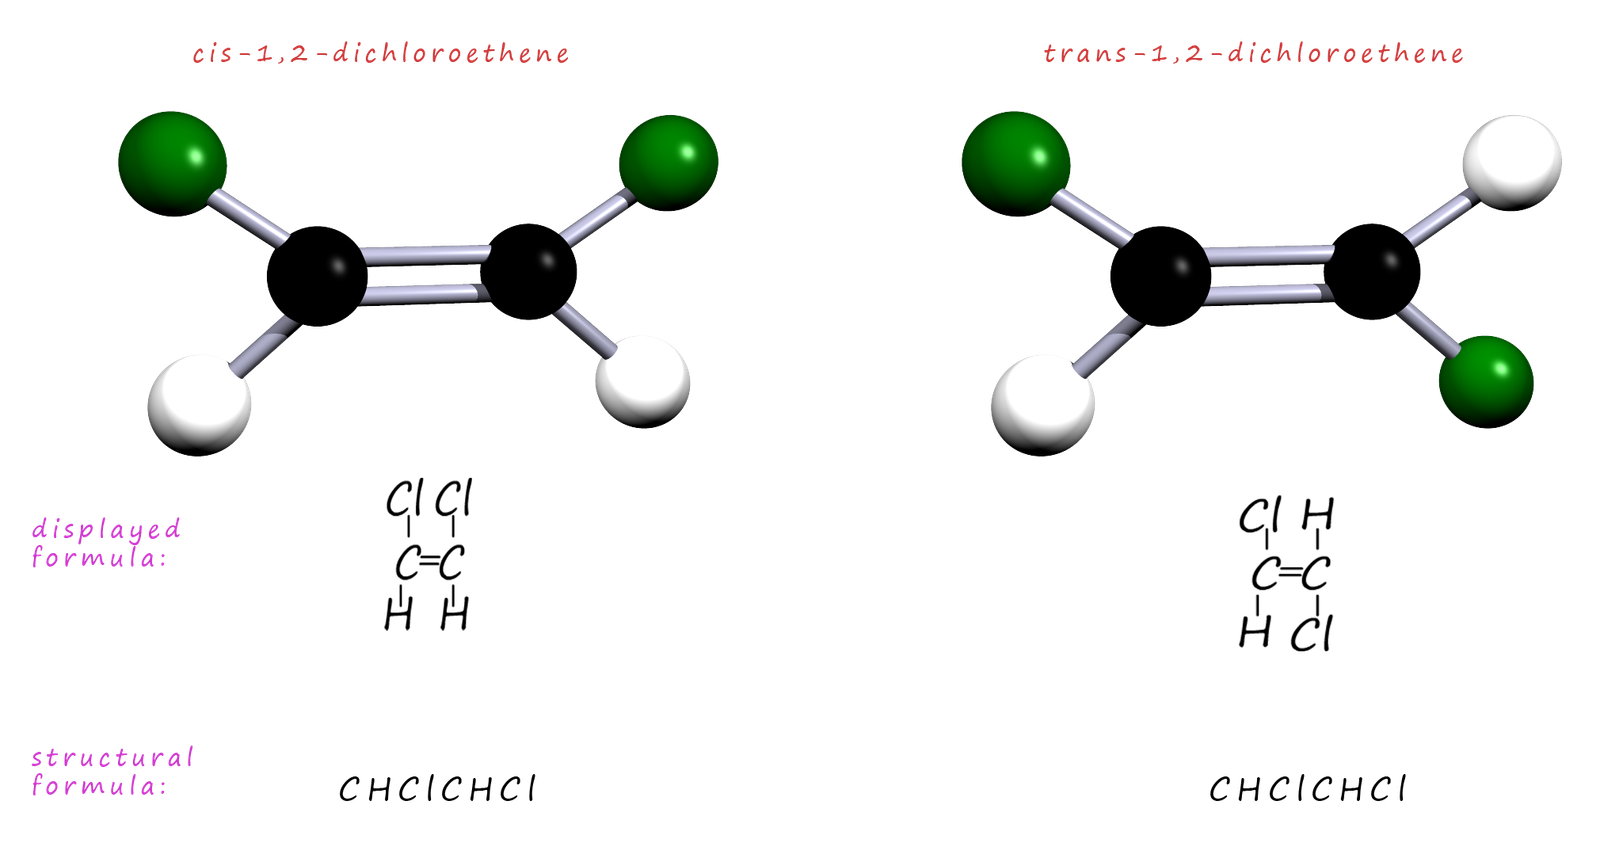 3d models of cis and trans isomers using dichloroethene as an example.